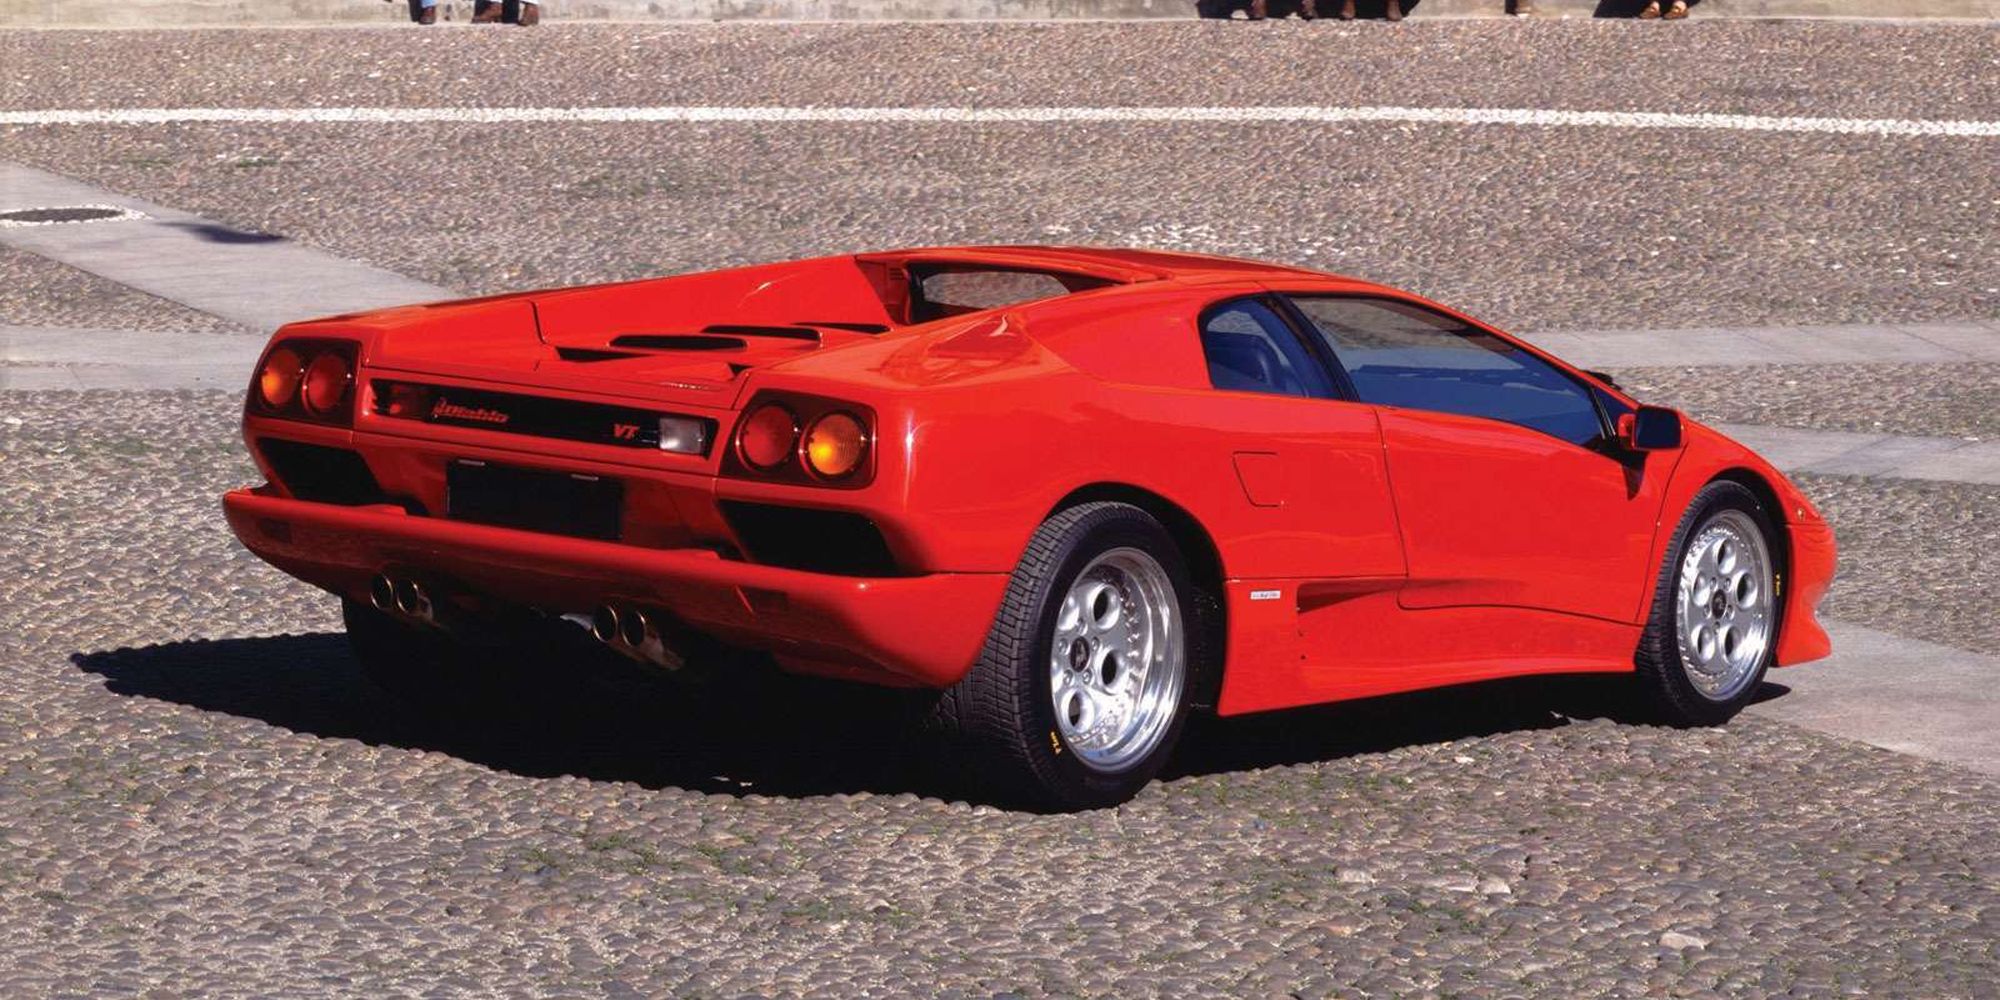 Rear 3/4 view of a red Diablo on a square